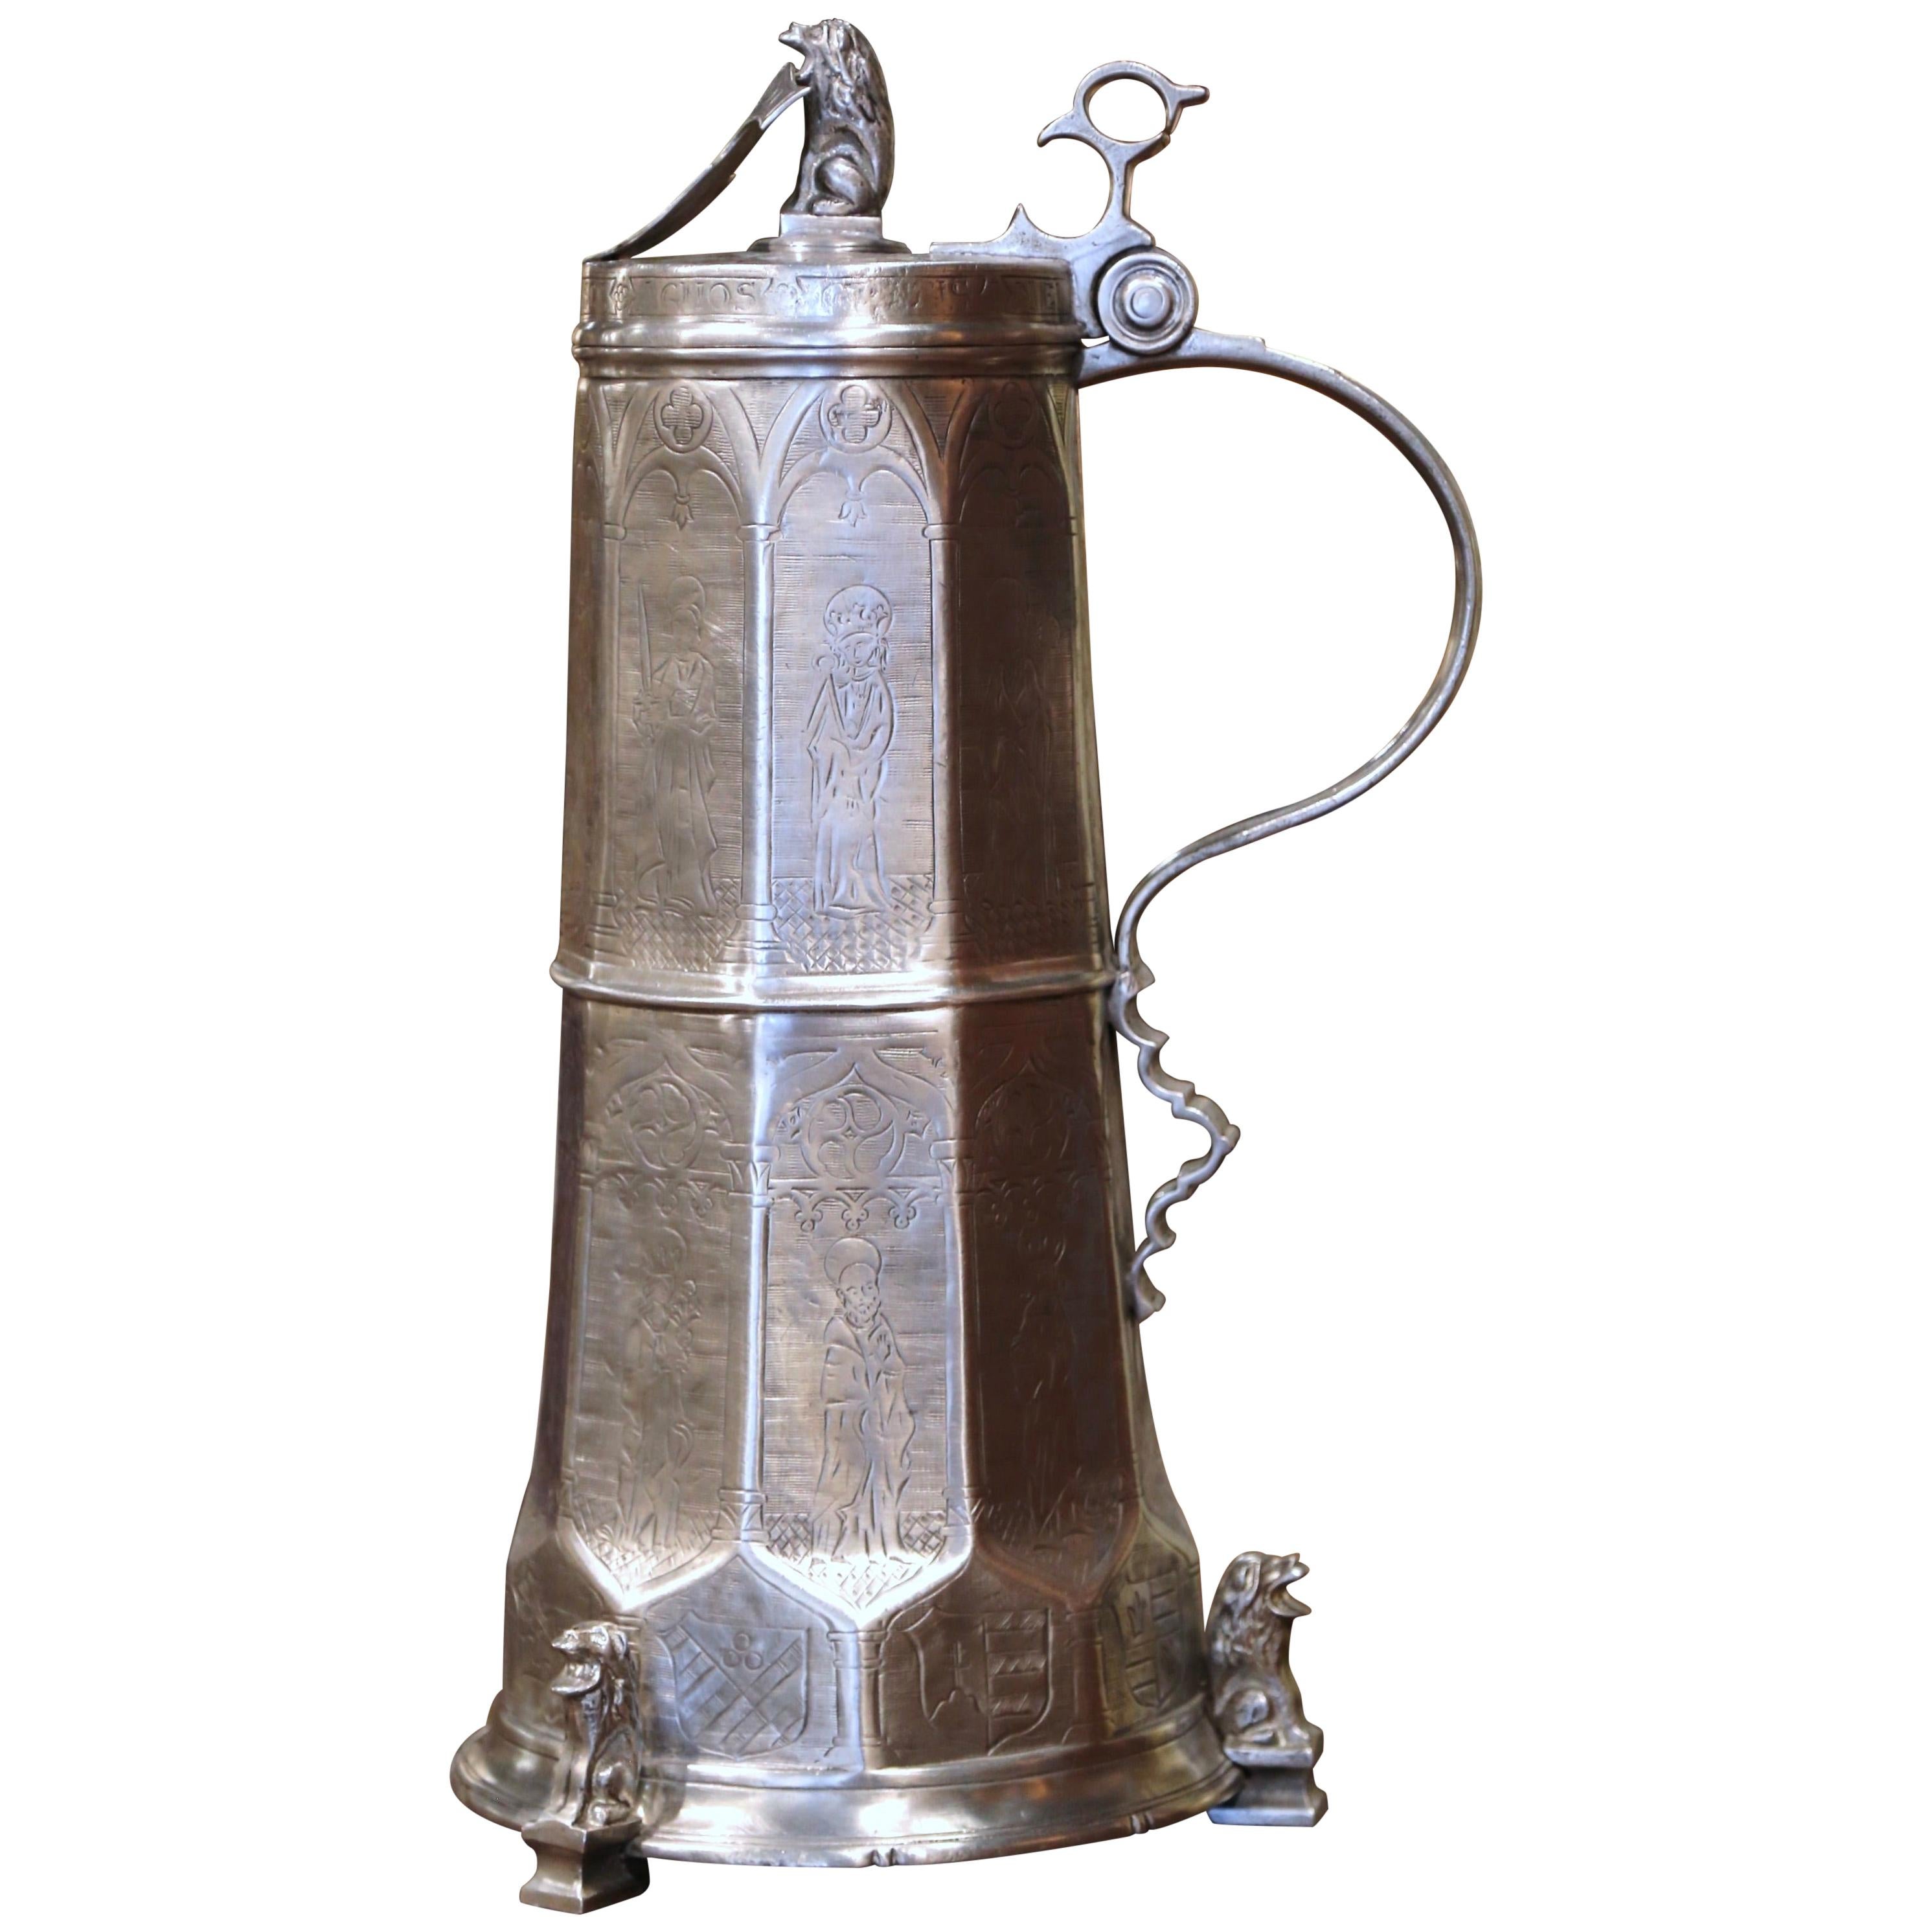 Vintage Italian Pewter Beer Stein with Lion Motifs and Engraved Decor